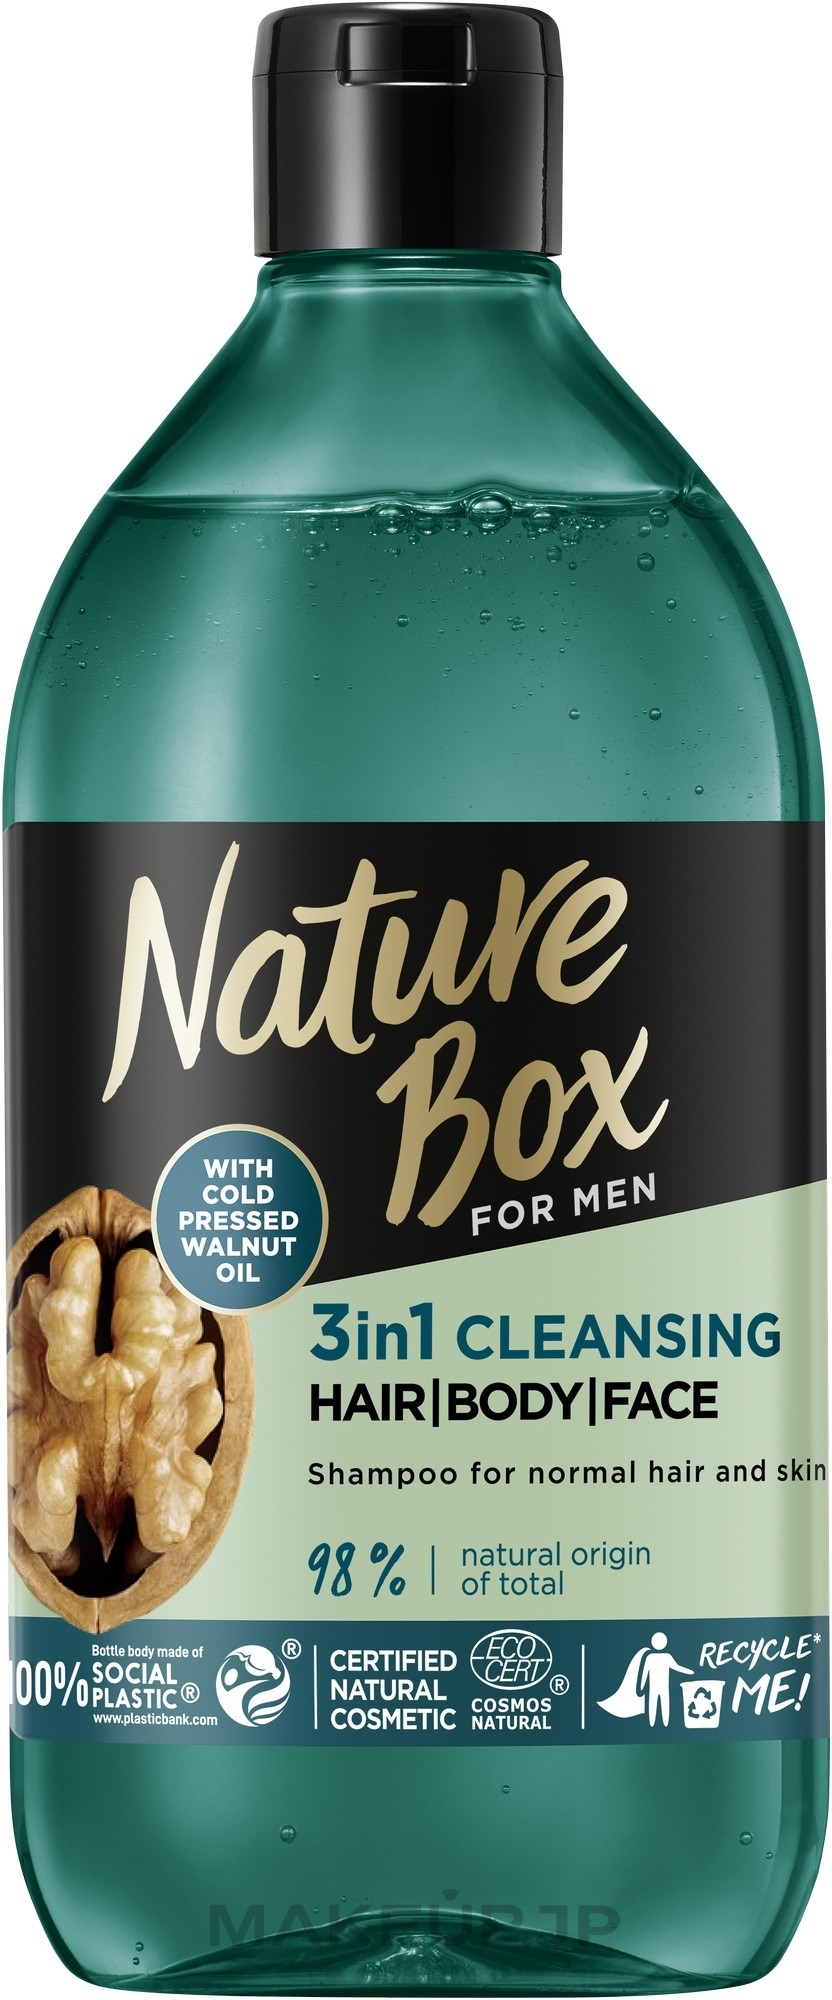 3-in-1 Walnut Cleansing Shampoo - Nature Box For Men Walnut Oil 3in1 Cleansing — photo 385 ml